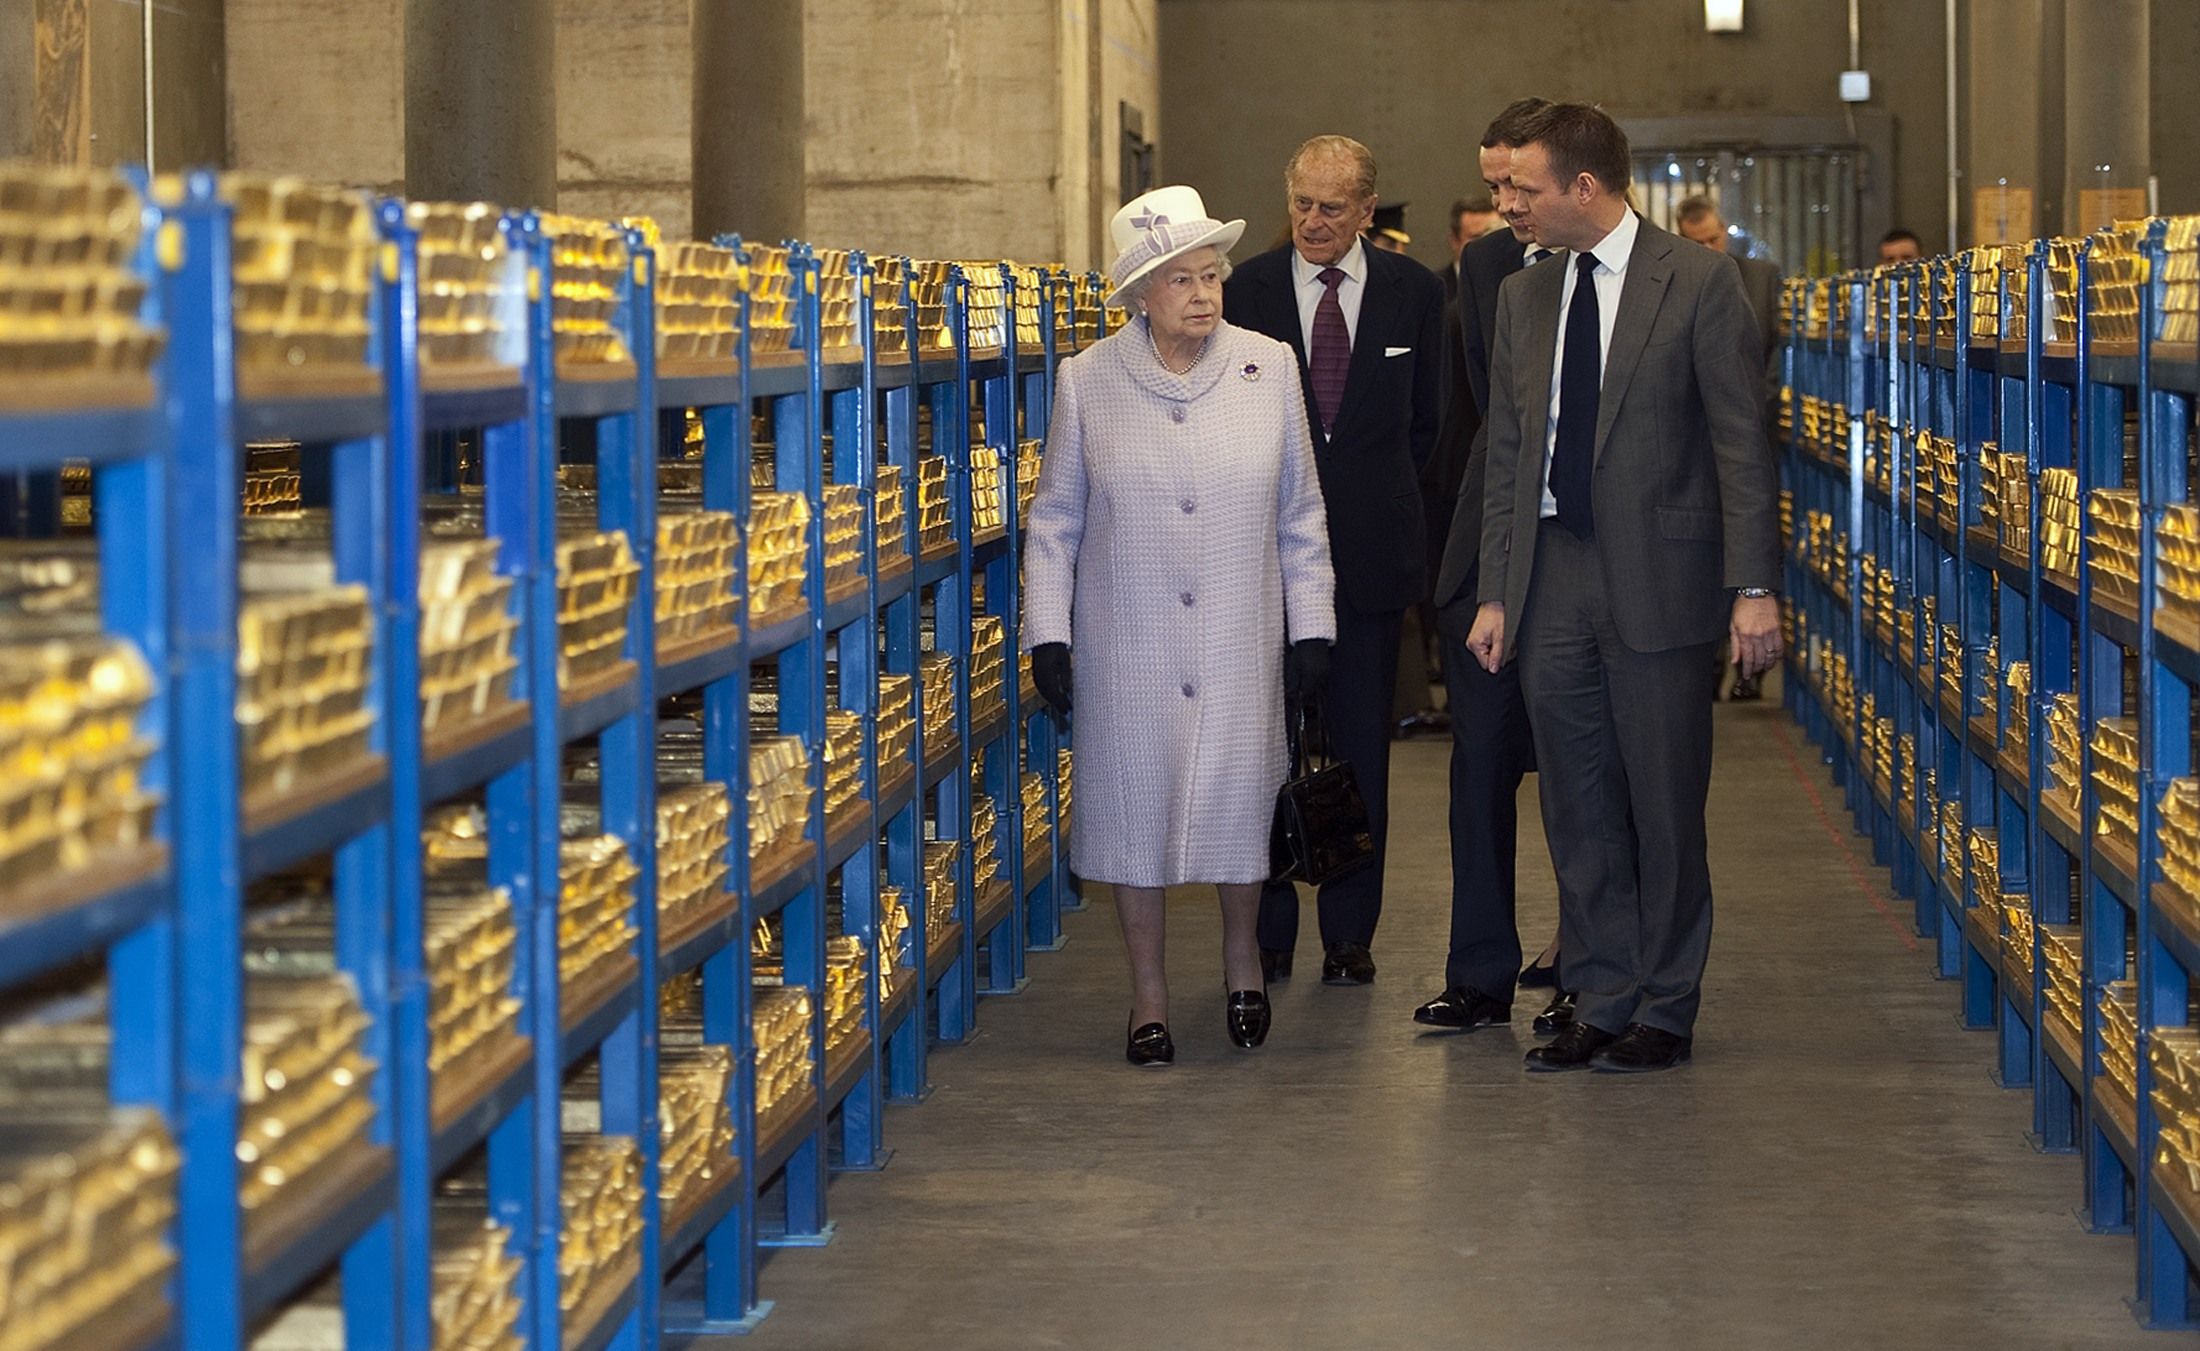 Unlike most other people, the Queen was allowed to touch and verify the gold.